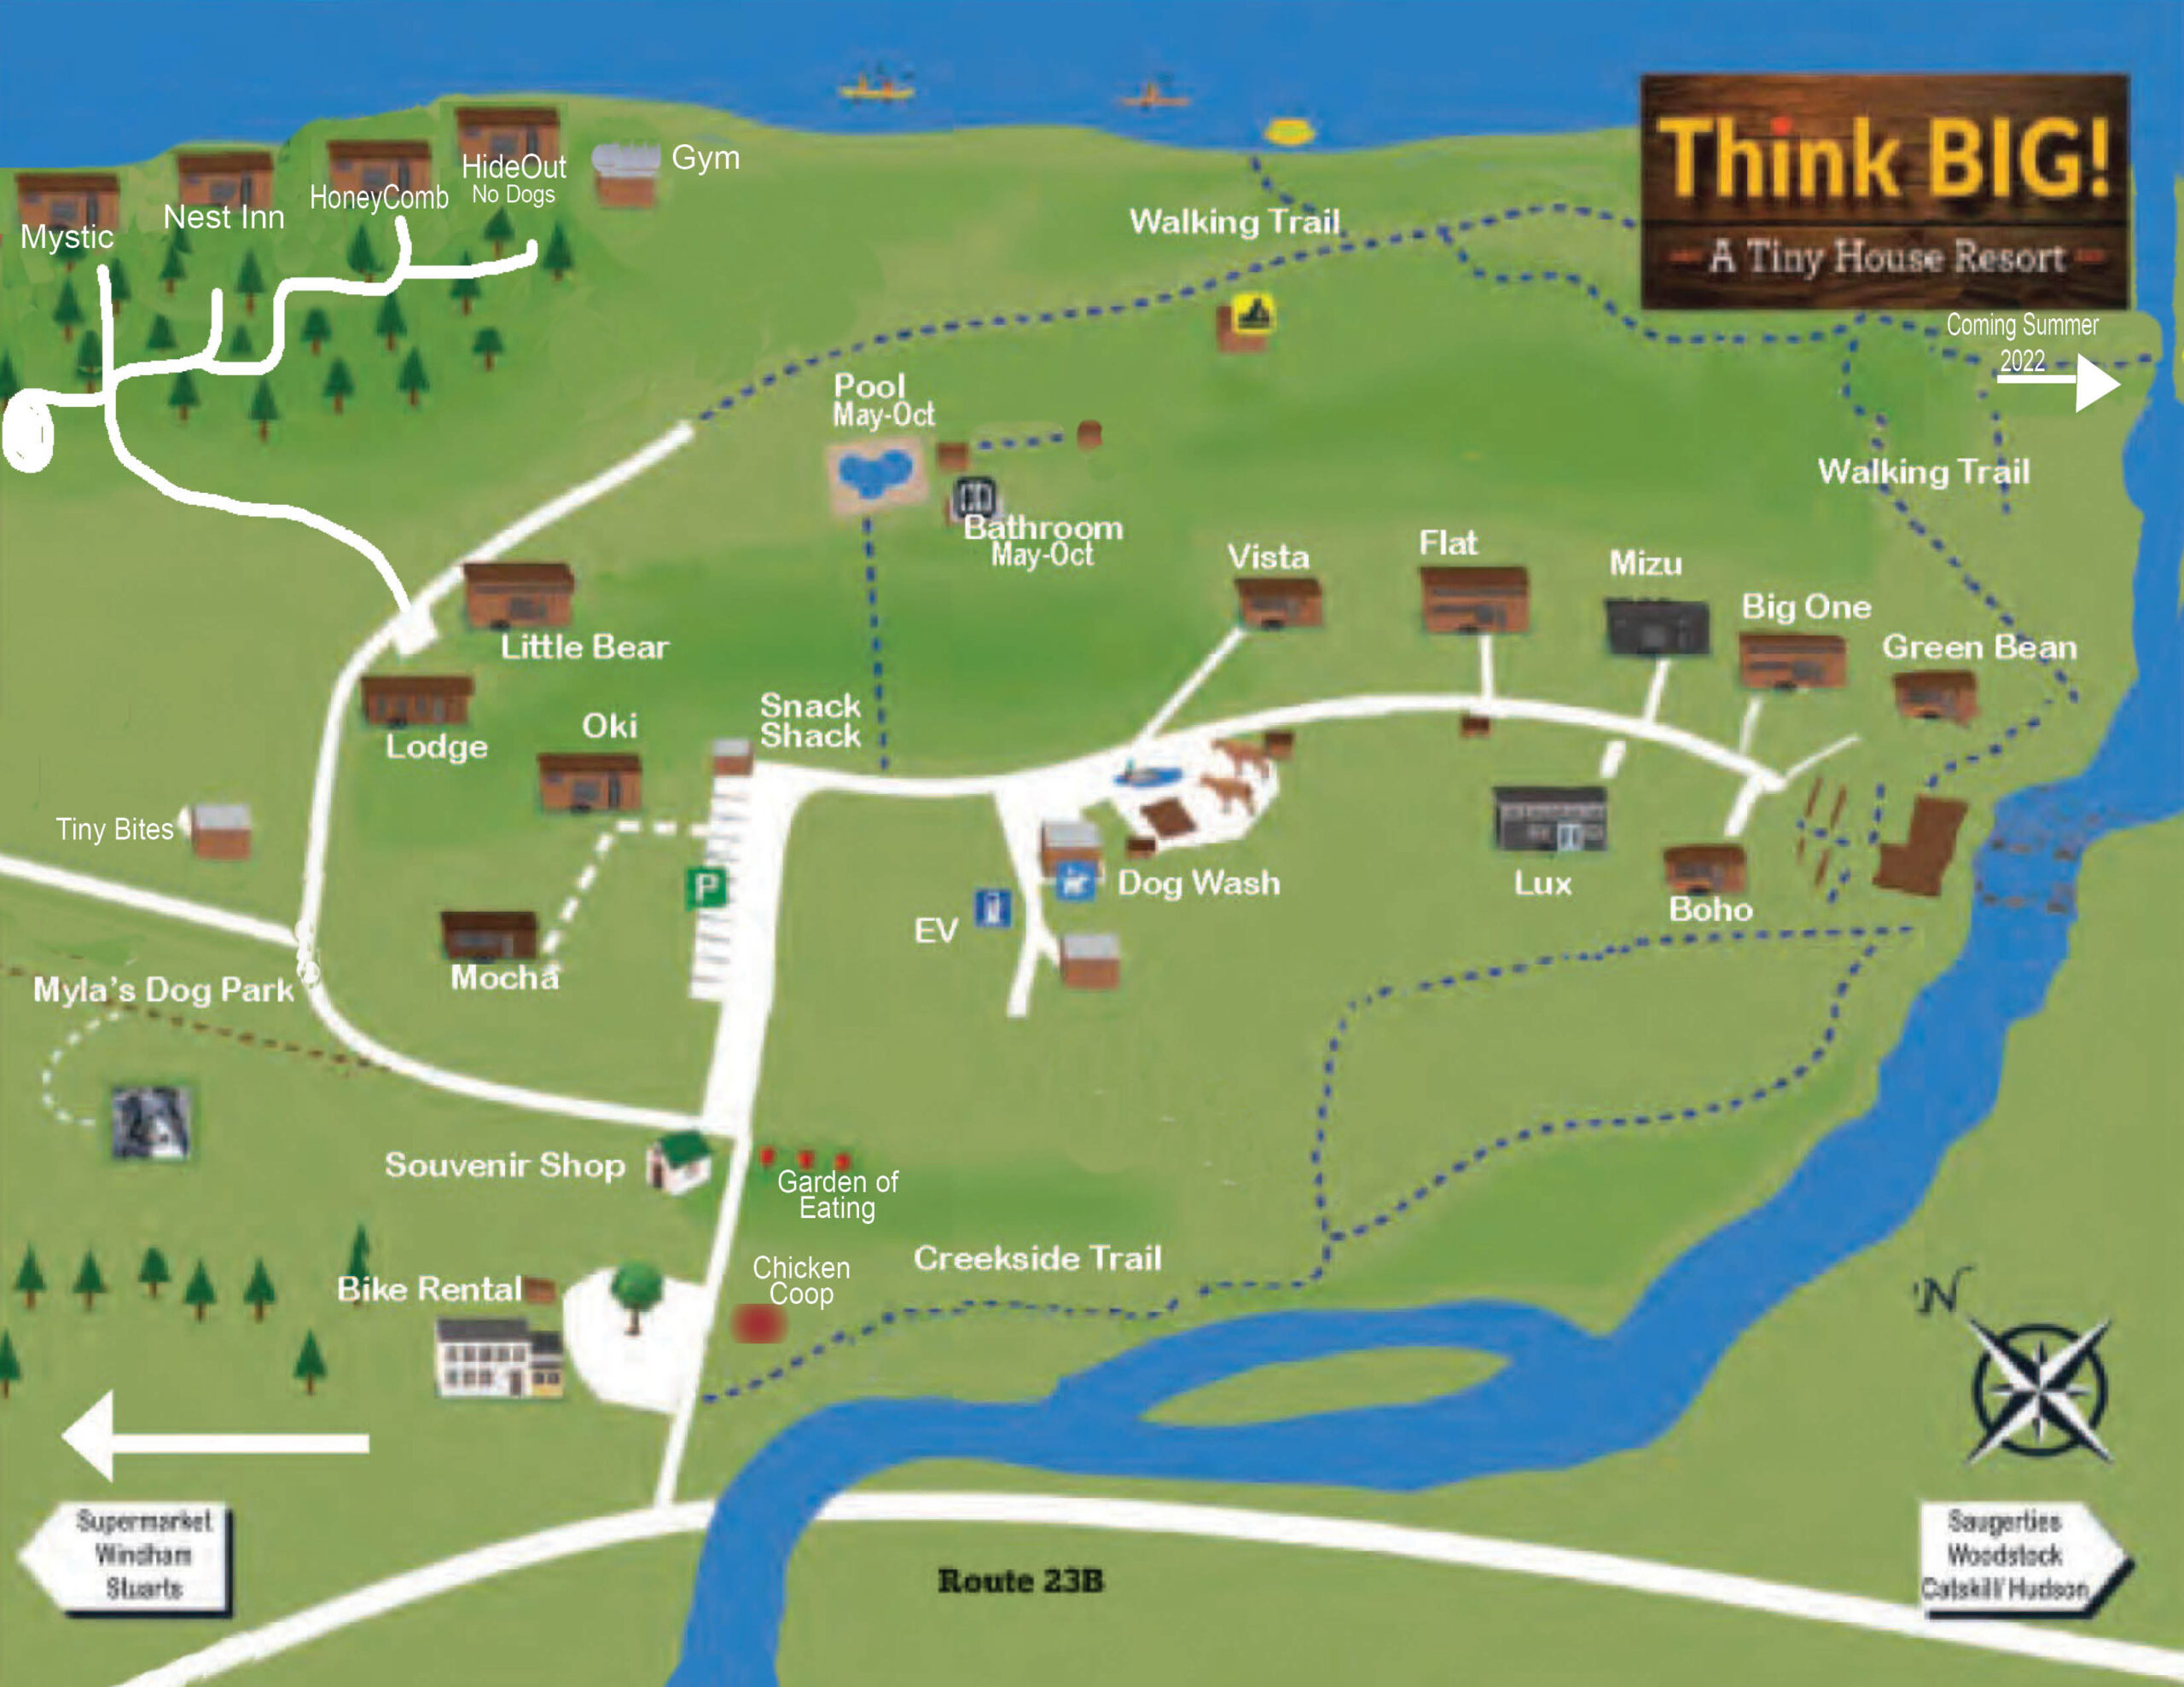 a tiny house resort map